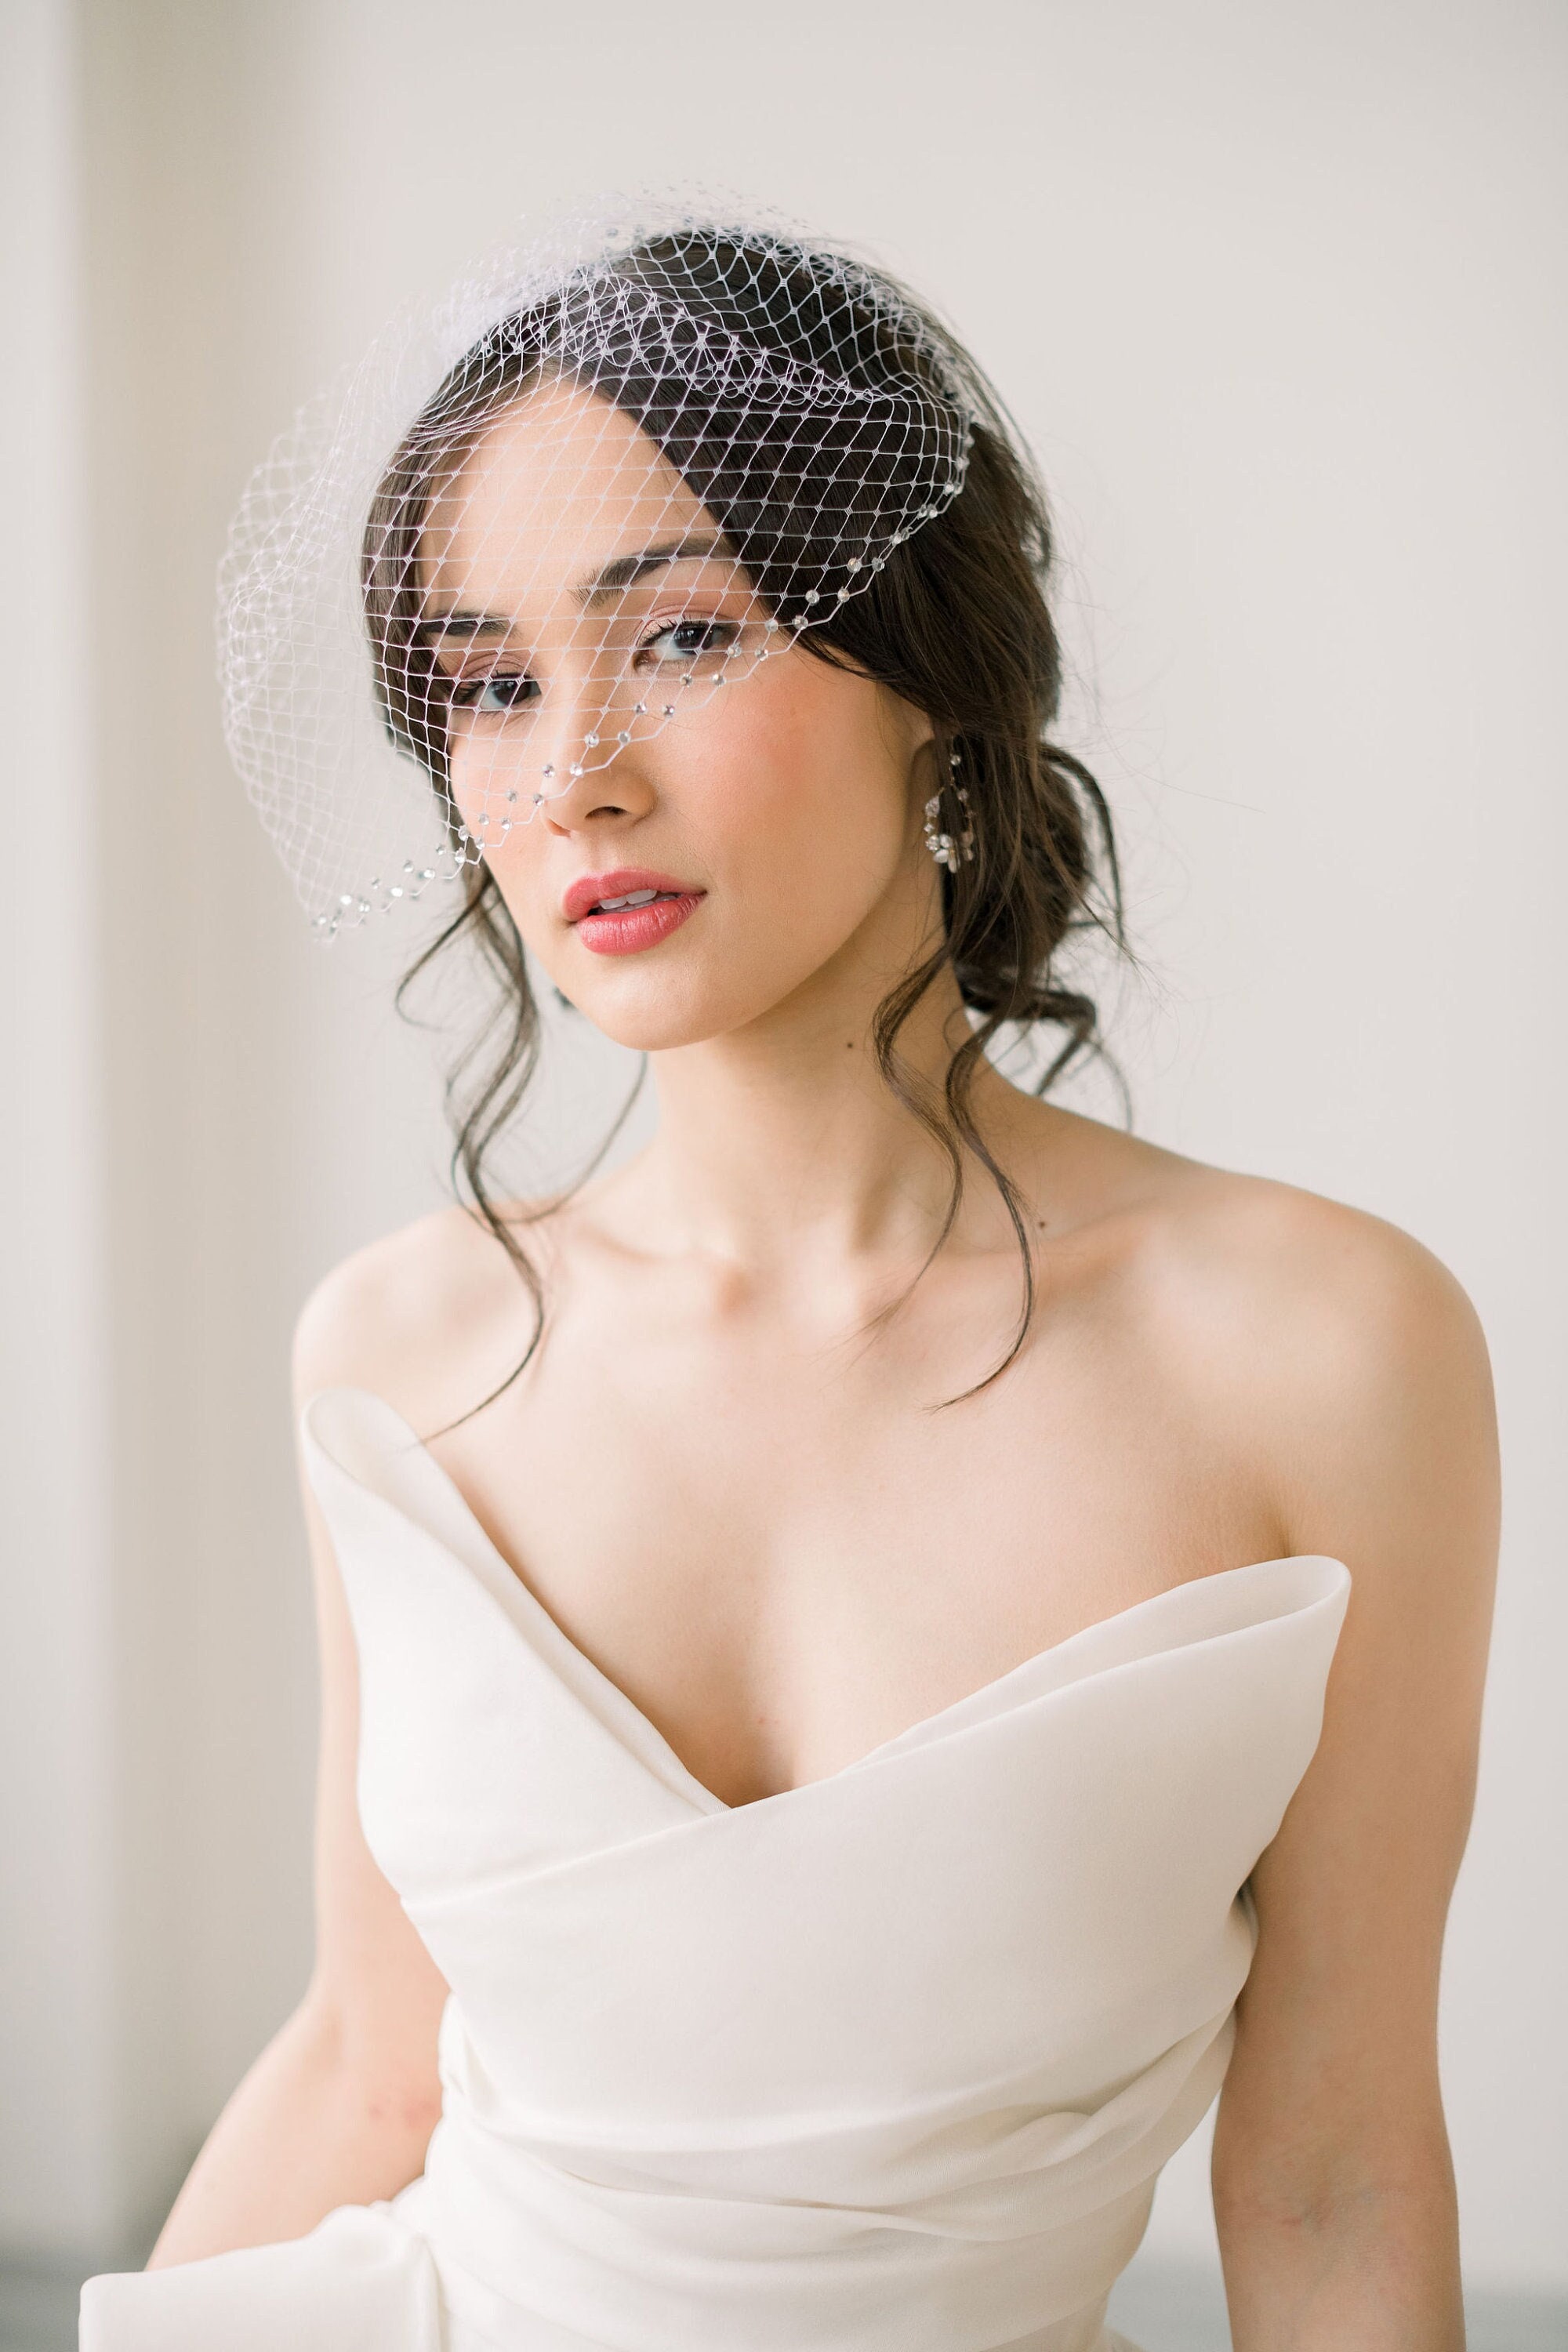 Mini Tulle birdcage veil with crystal pearl accents - ready to ship